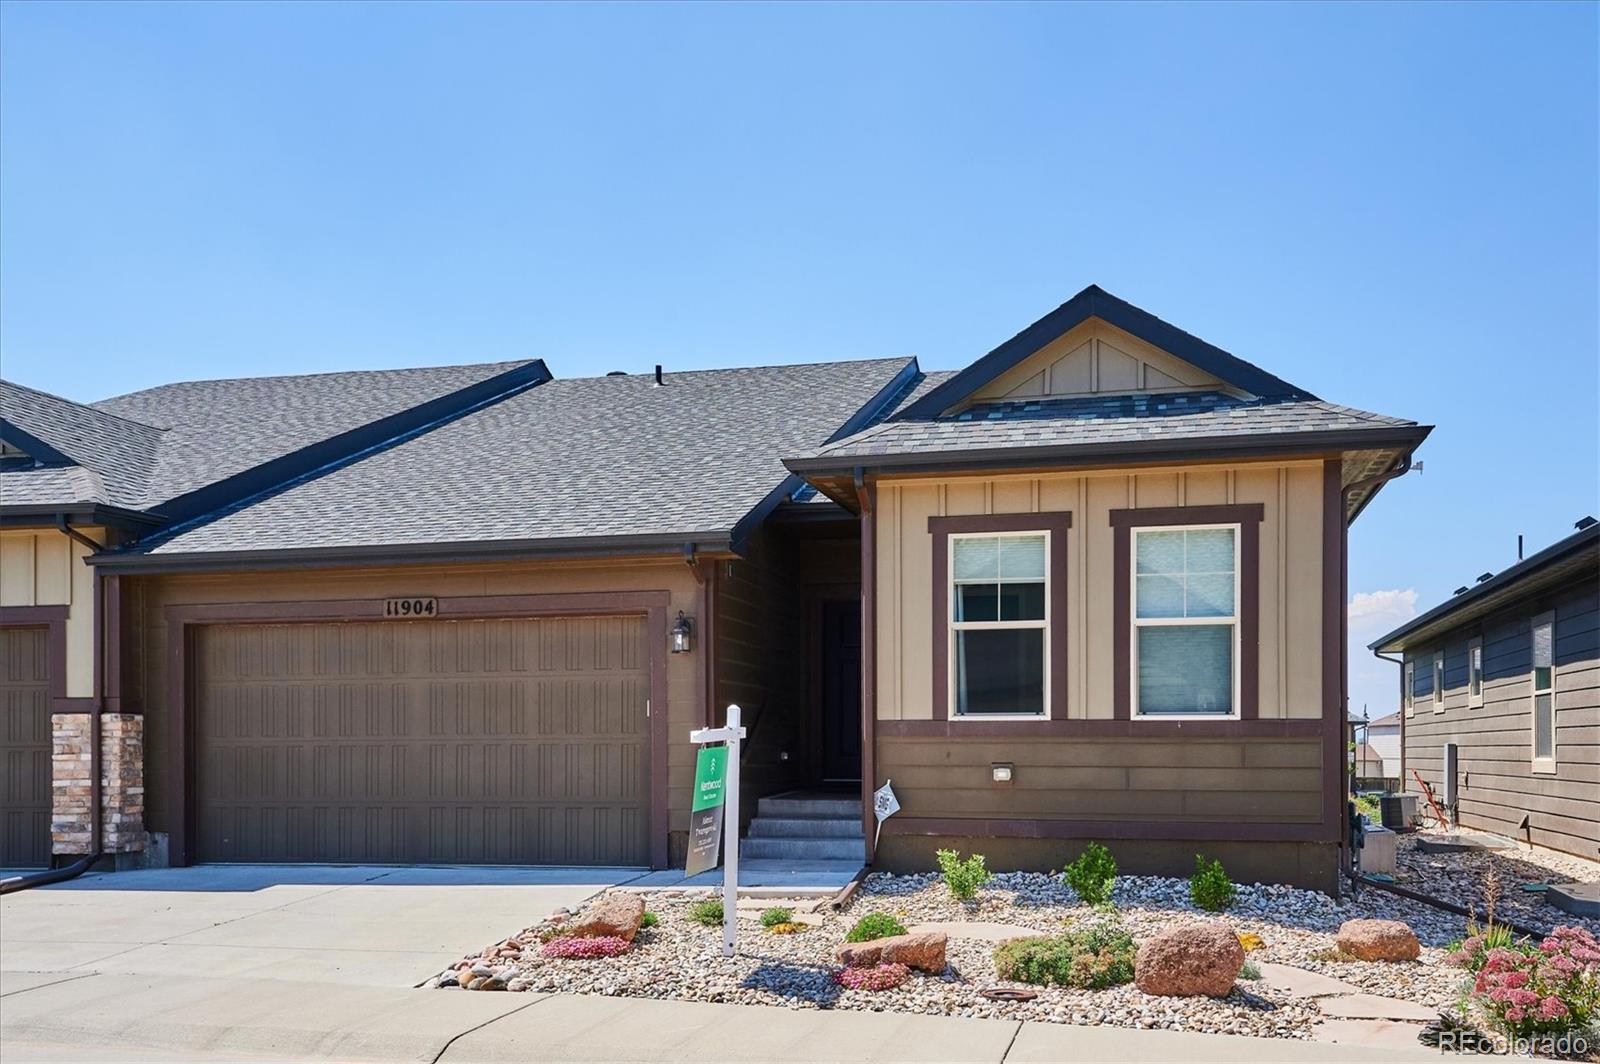 11904  barrentine loop, Parker sold home. Closed on 2024-03-28 for $637,000.